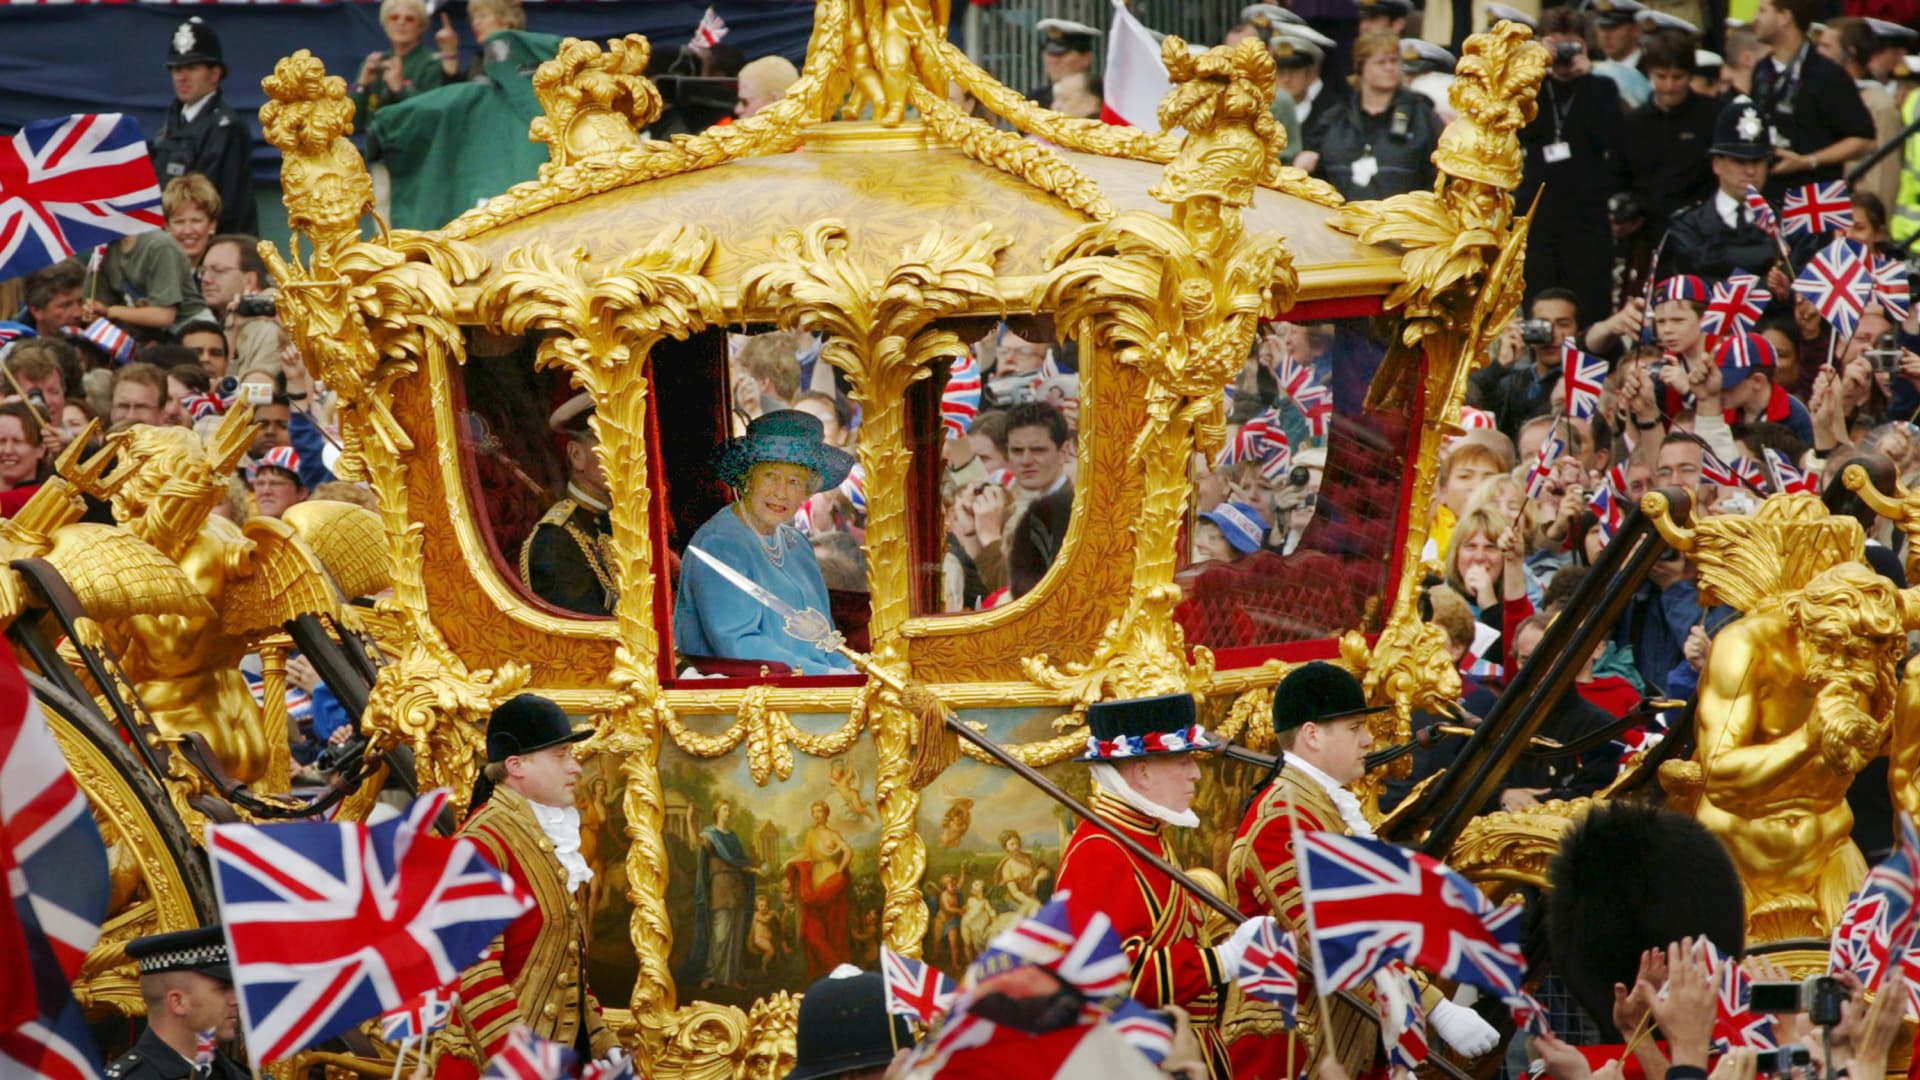 Queen Elizabeth and Prince Philip ride in the Golden State Carriage at the head of a parade celebrating the queen's Golden Jubilee, June 4, 2002